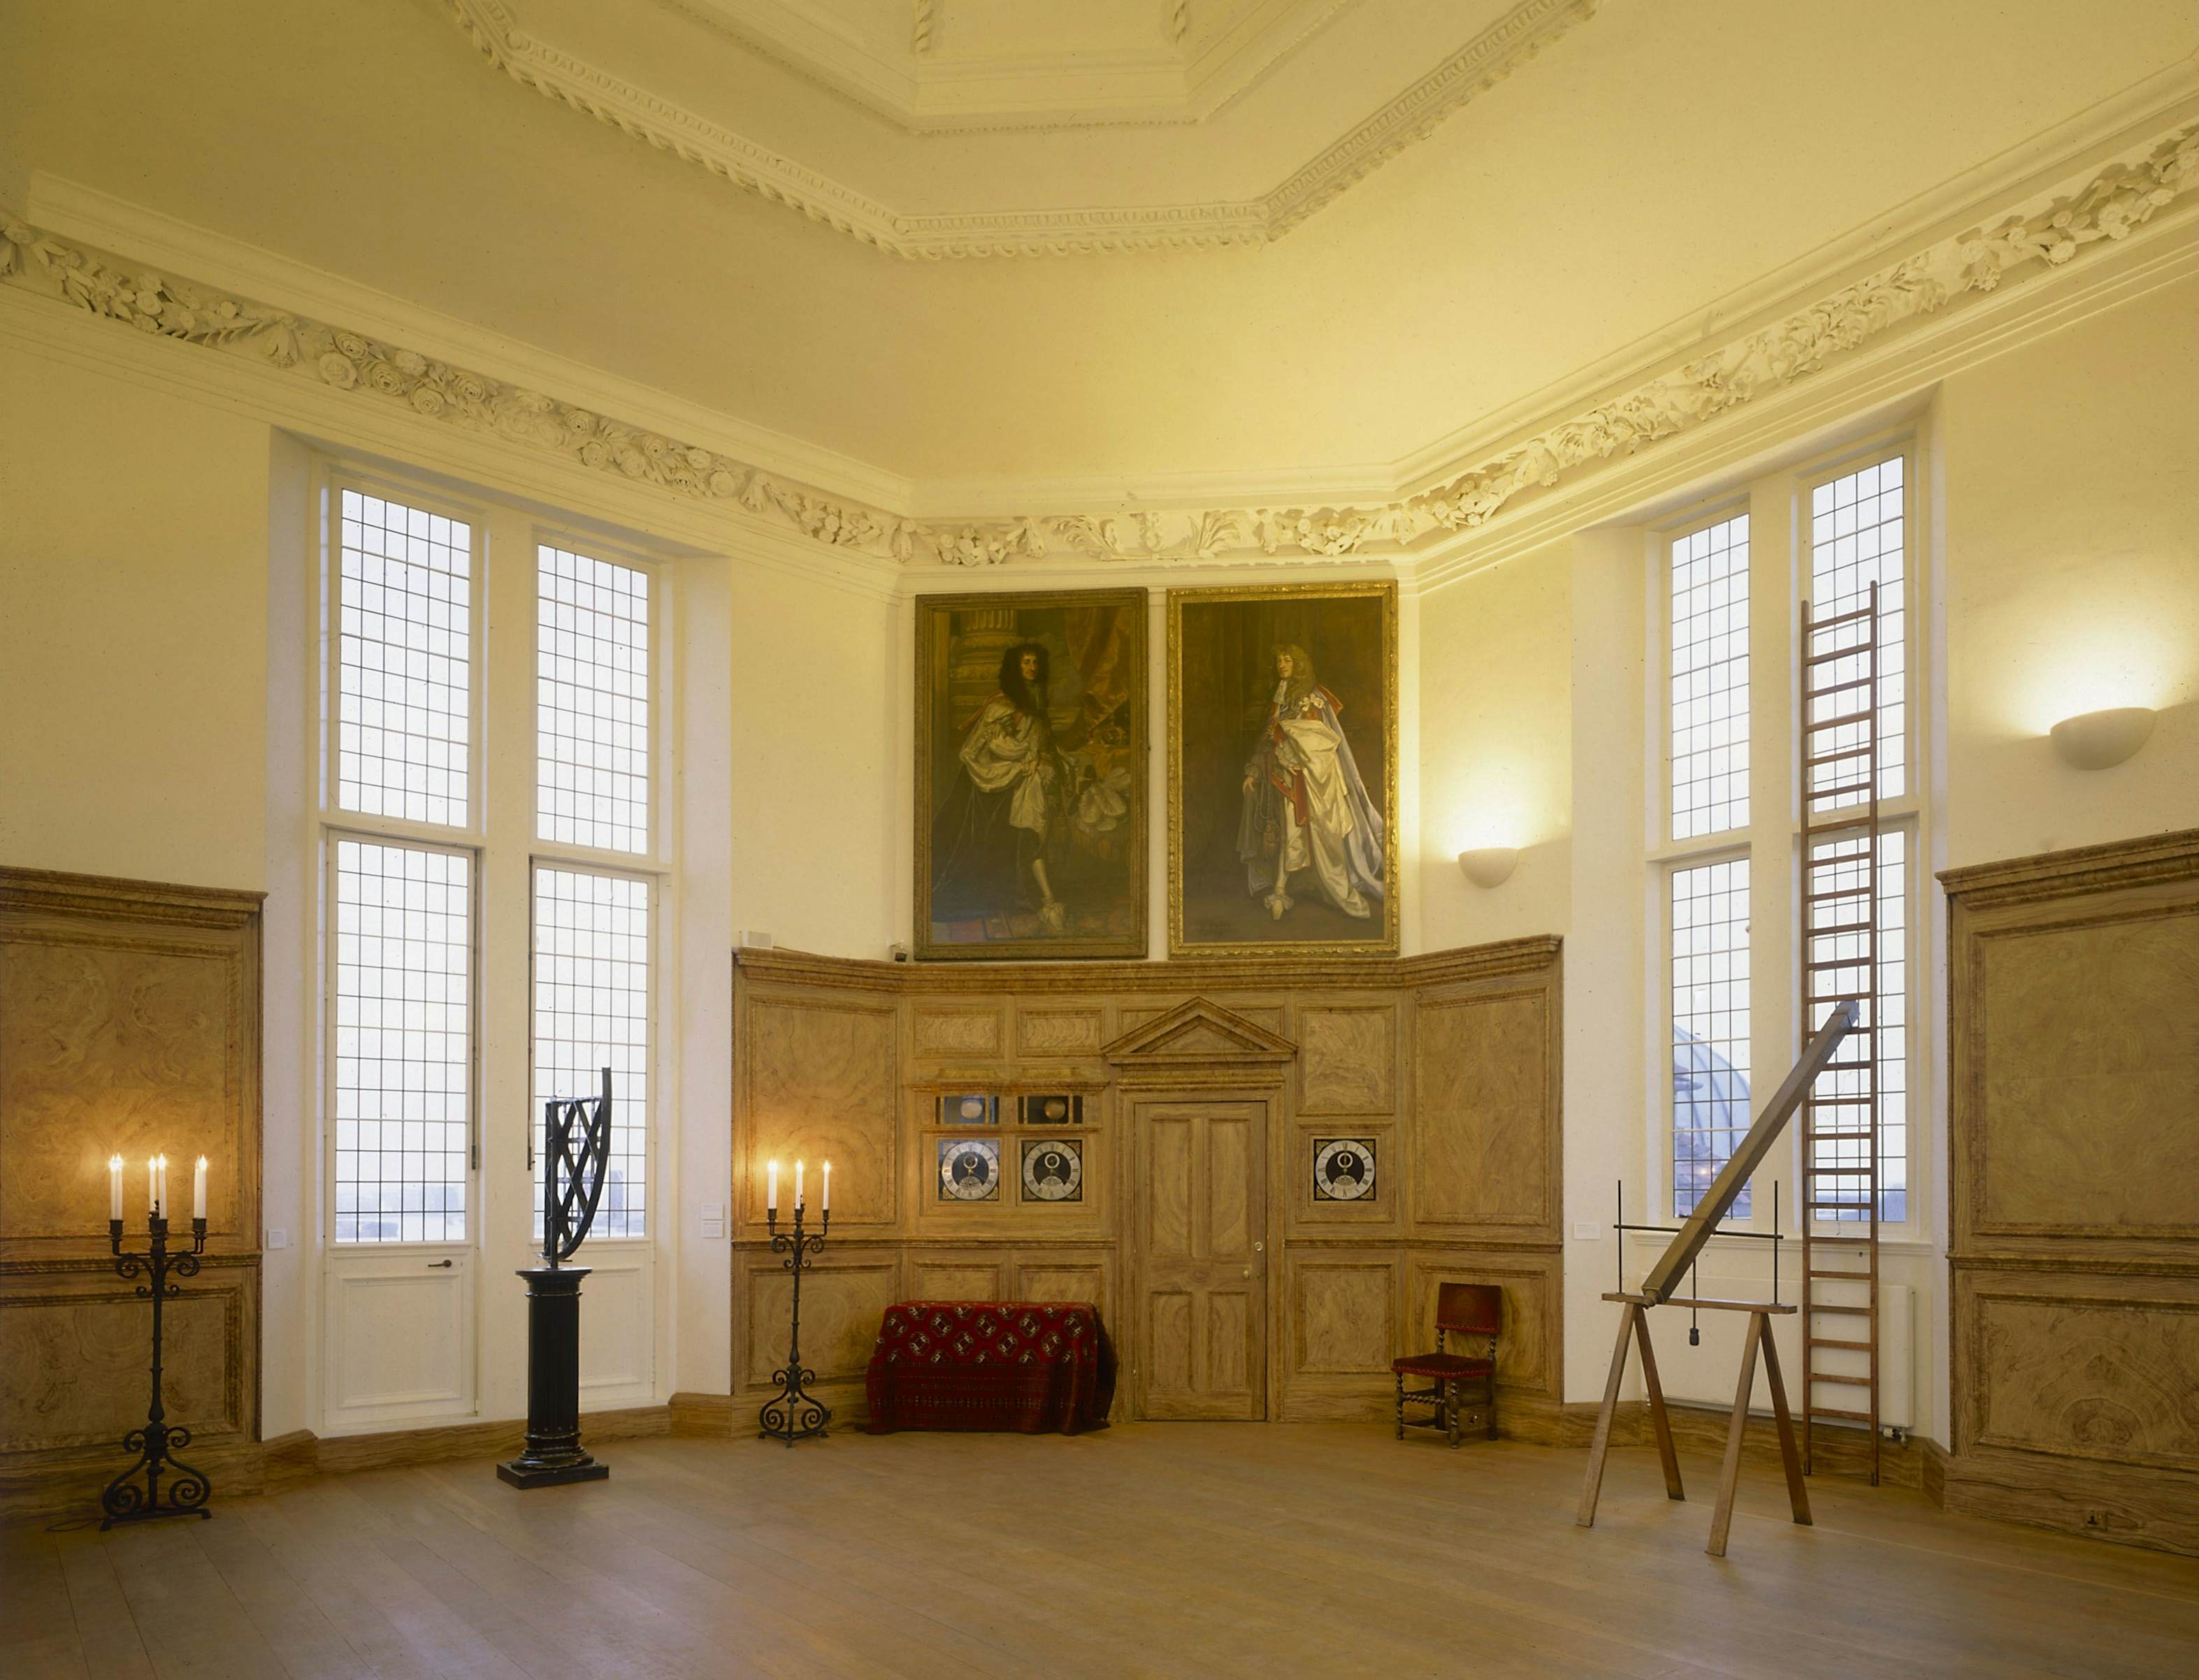 The beautiful Octagon Room at Flamsteed ...